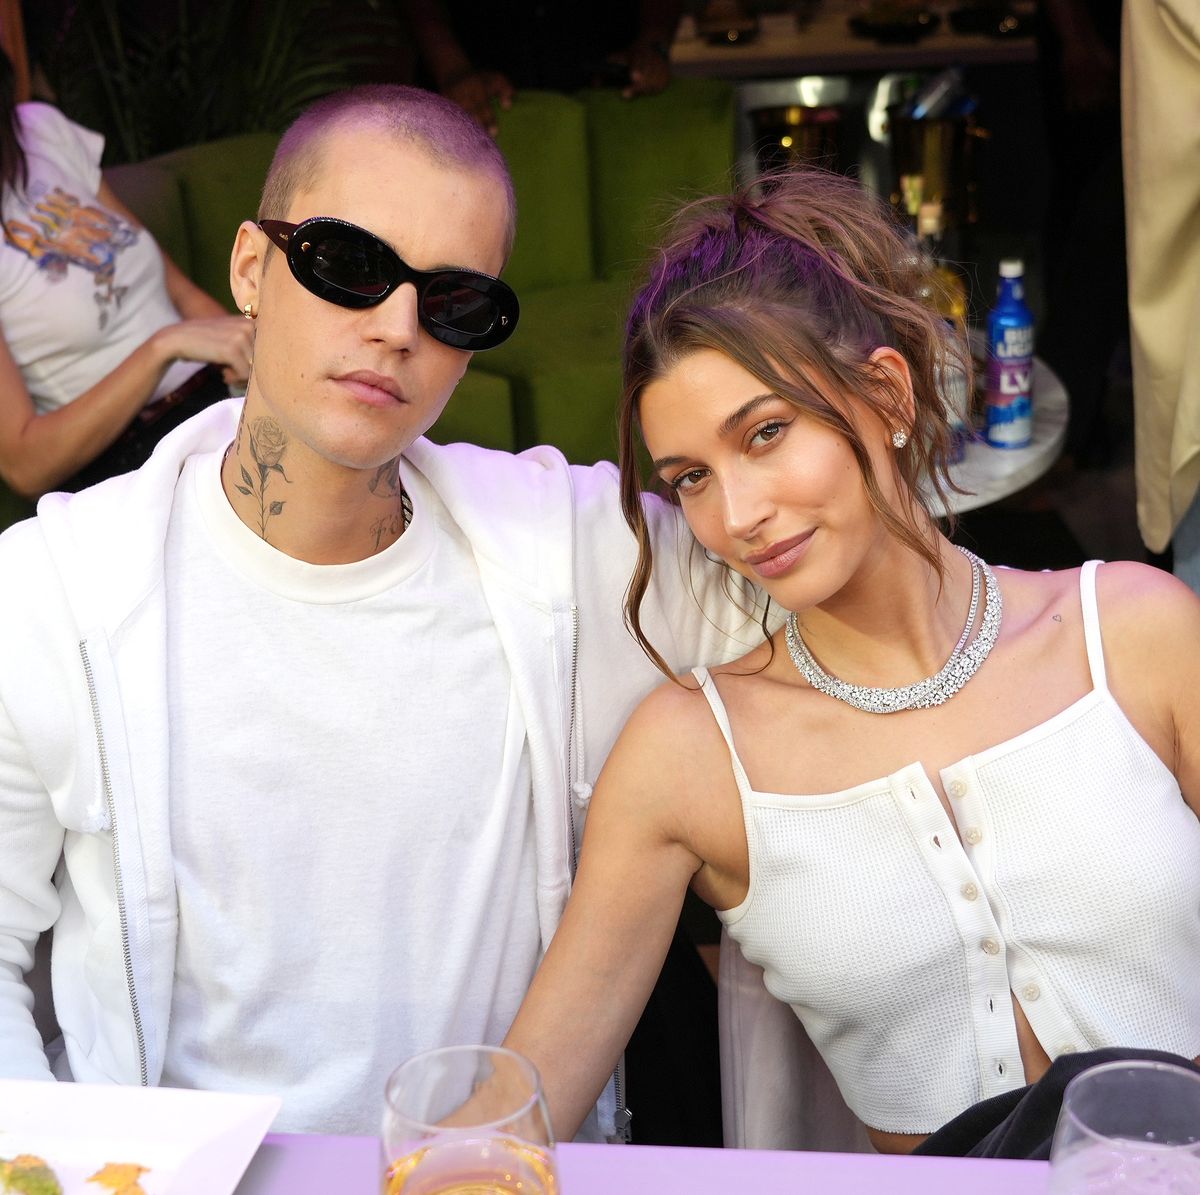 Hailey Baldwin reveals she wants to start a family with husband Justin  Bieber after whirlwind romance